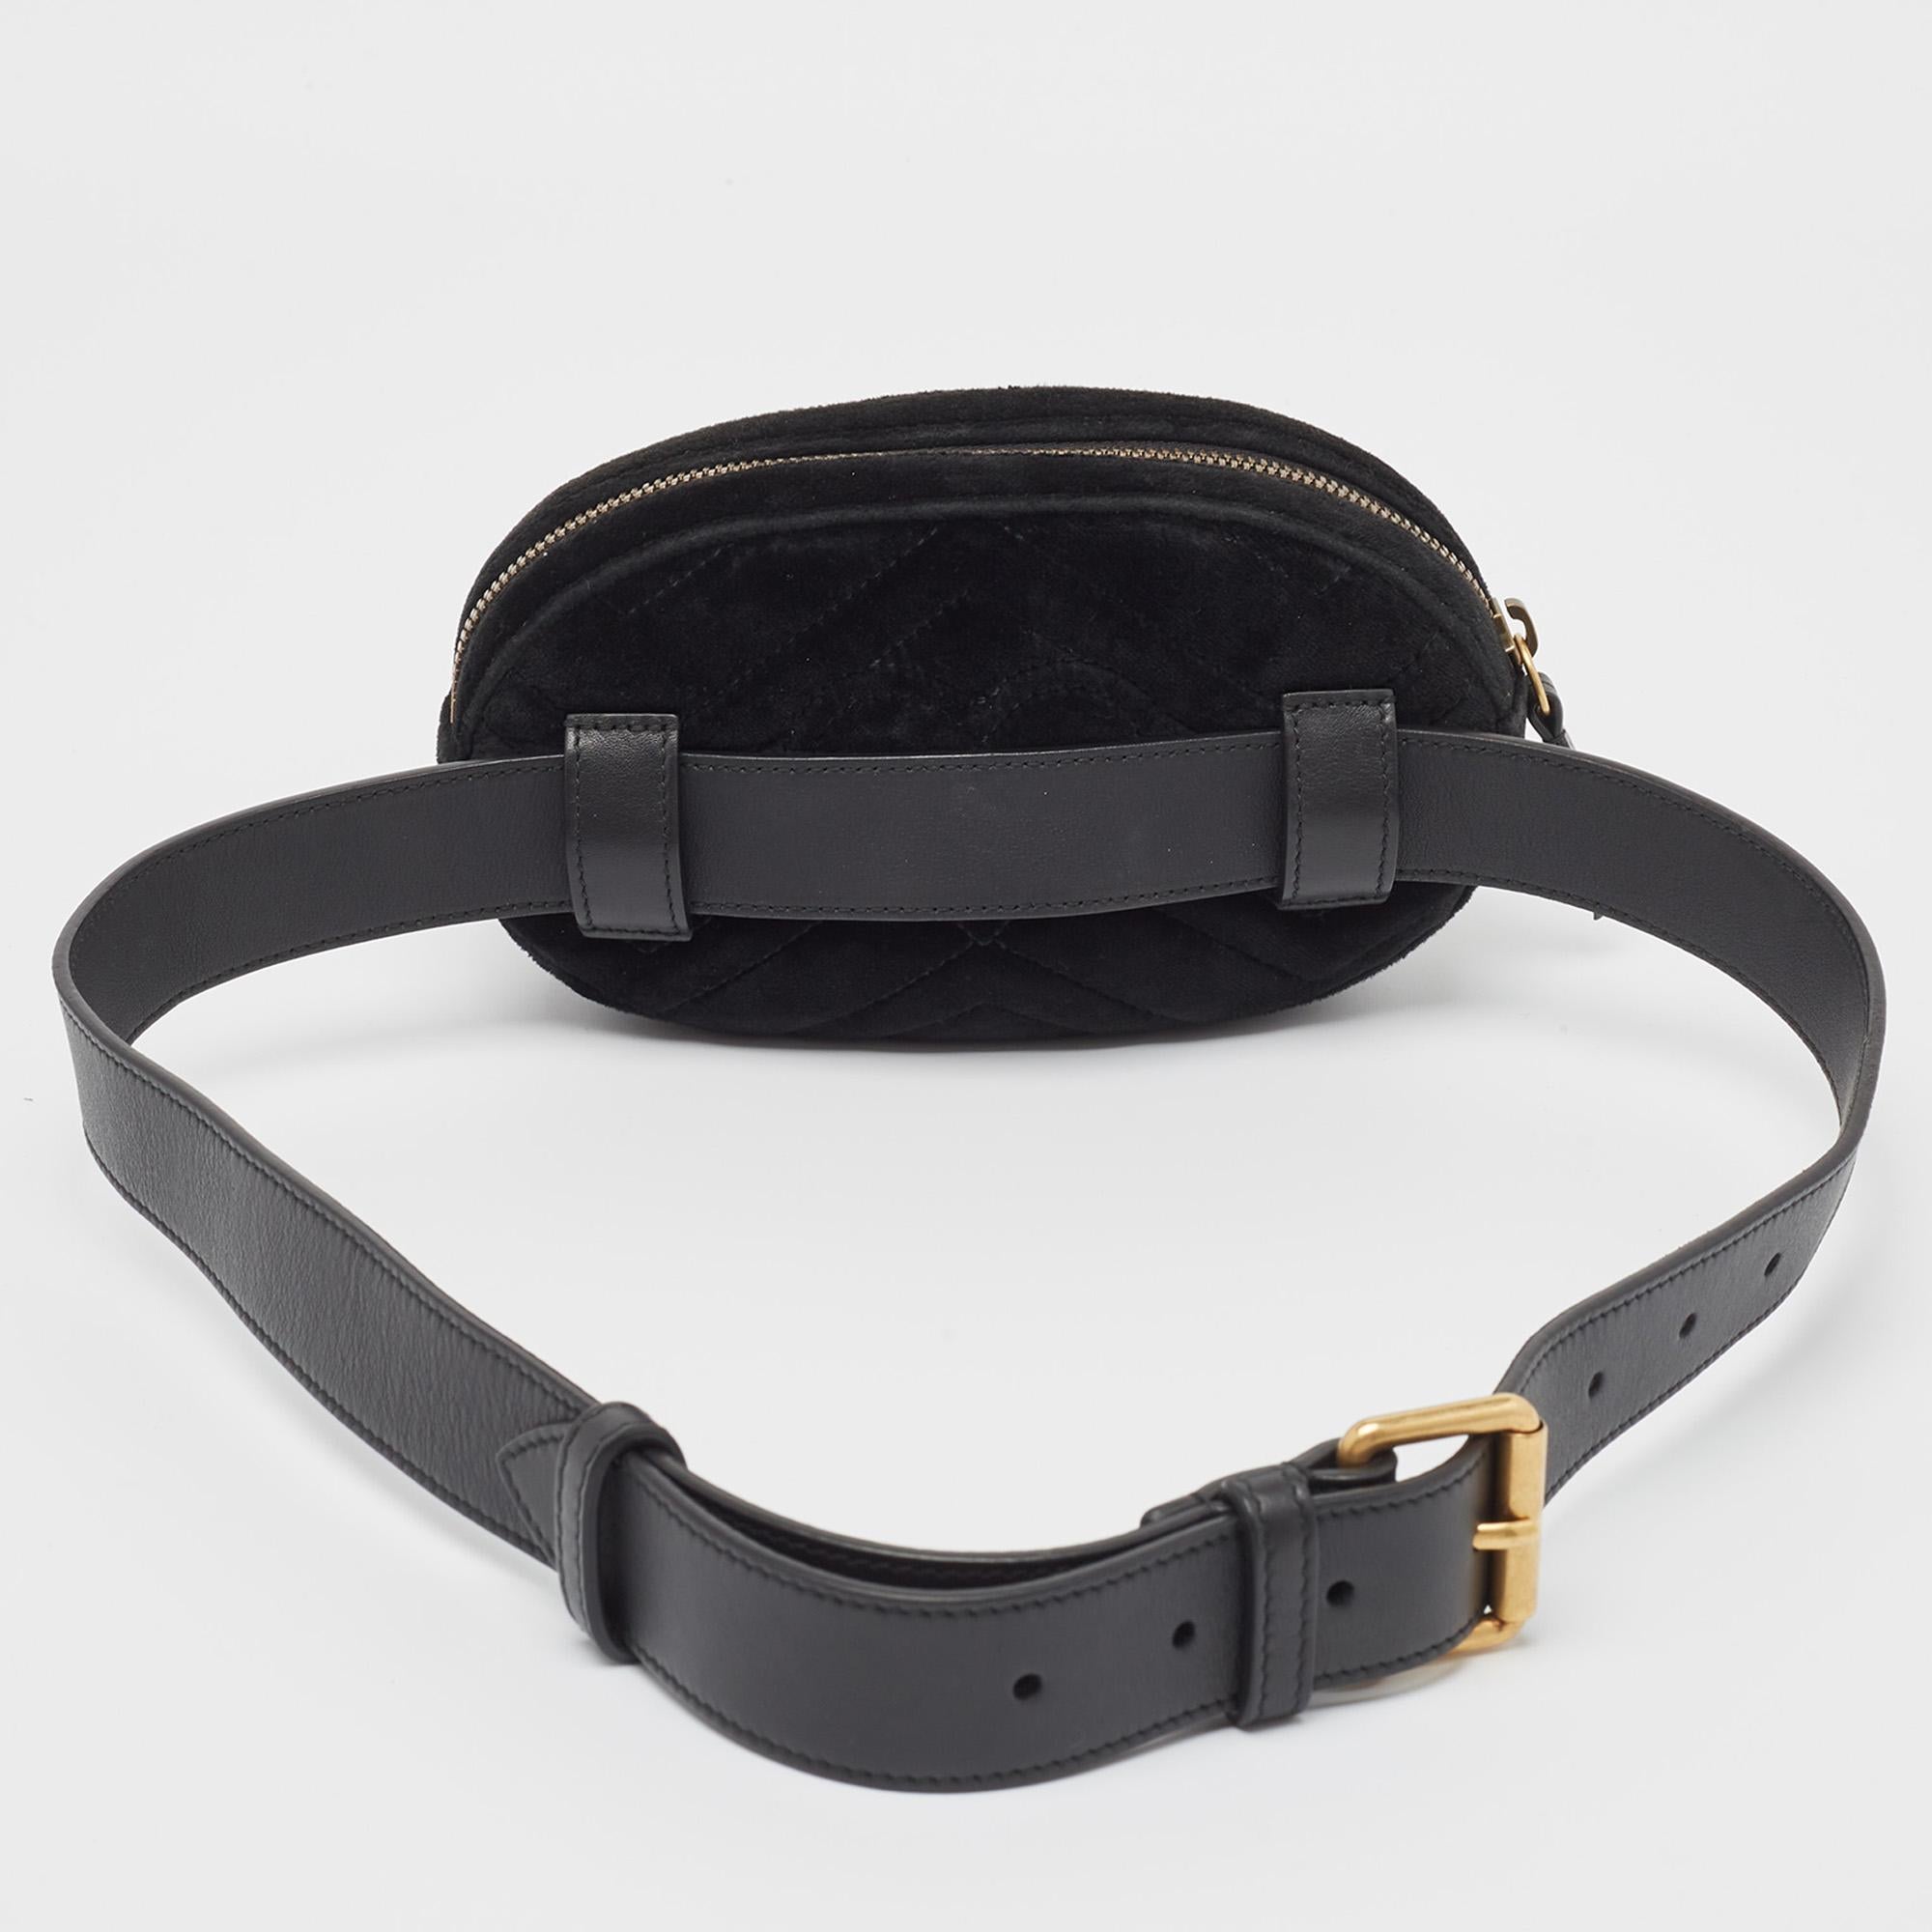 Chic and sophisticated, this Gucci GG Marmont belt bag has the power to elevate the simplest of outfits. Finely crafted from matelassé velvet & leather, it gets a luxe update with a double 'G' motif on the front.

Includes: Belt Strap